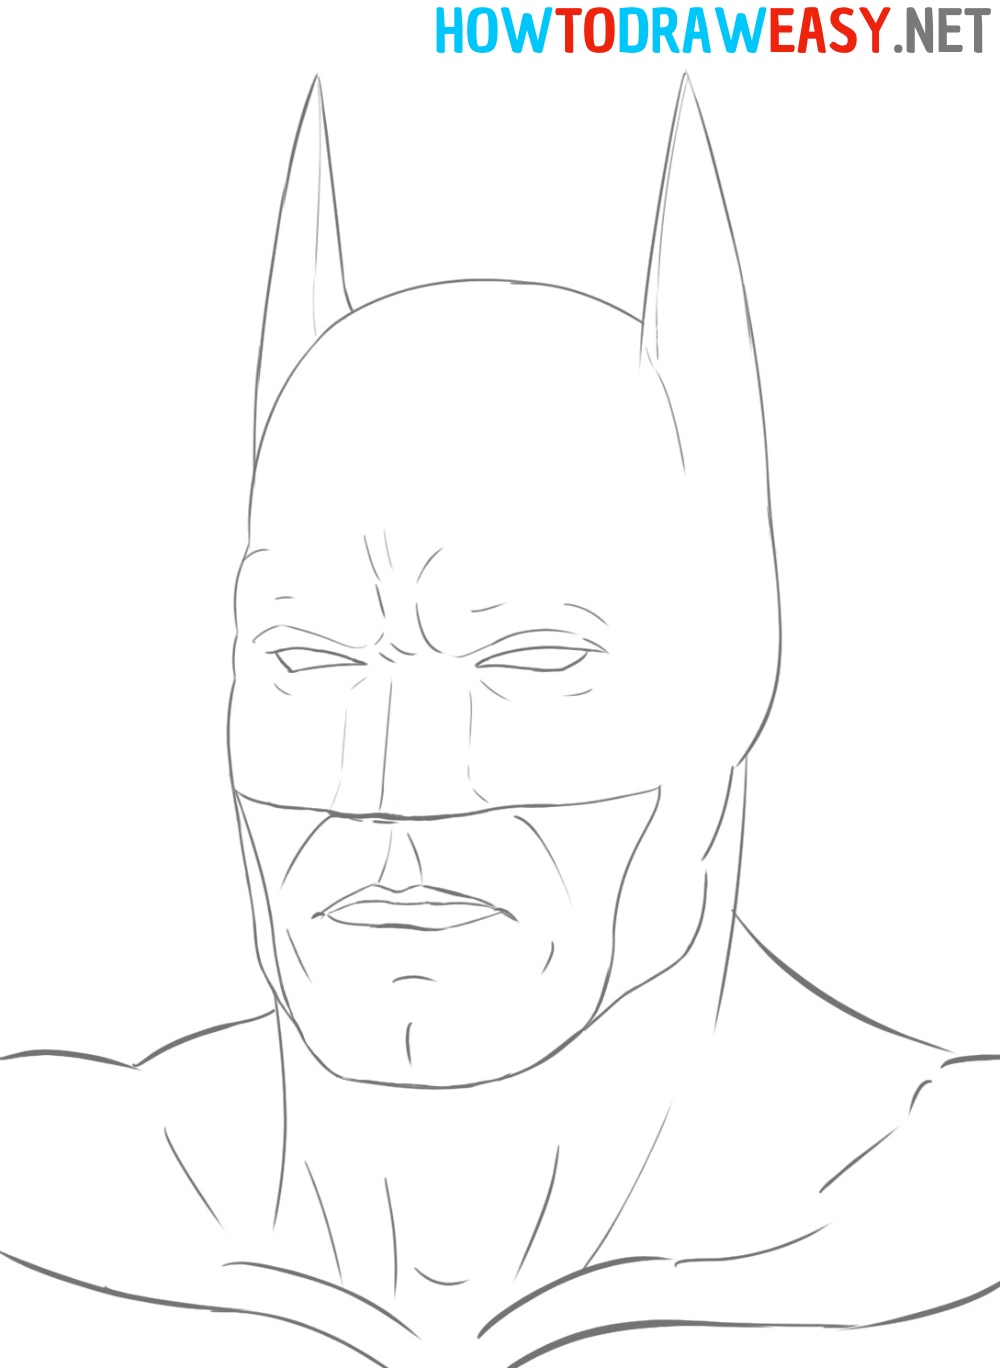 How to Draw Batman's Face Easy